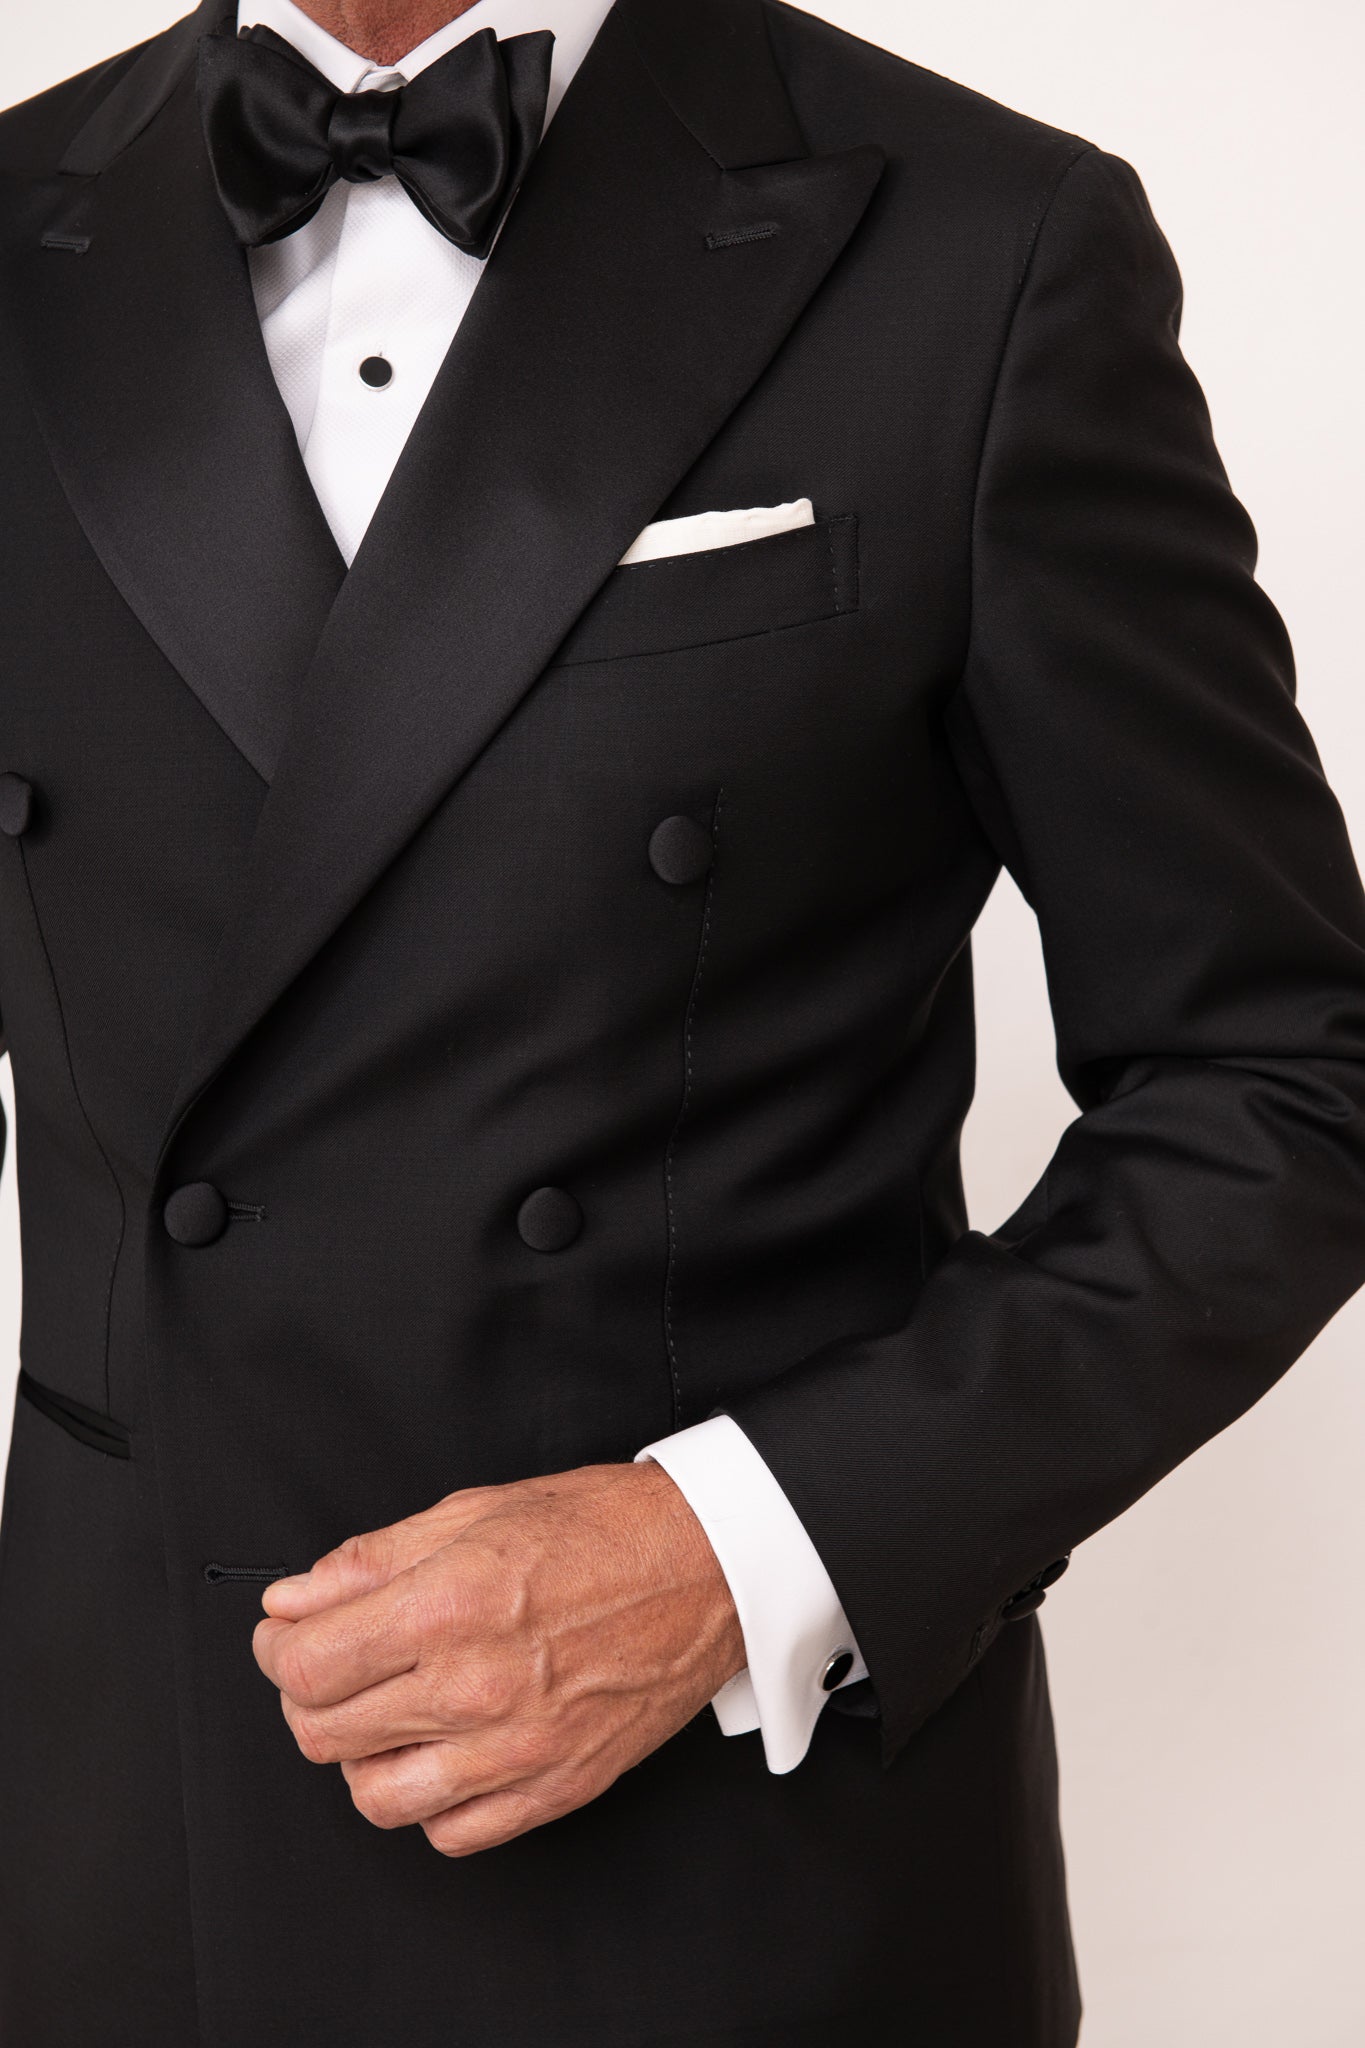 Mens Solid Black Italian Style Two Button Slim Cut Cheap Priced Business  Suits Clearance Sale Cheap Suits For Men - Walmart.com